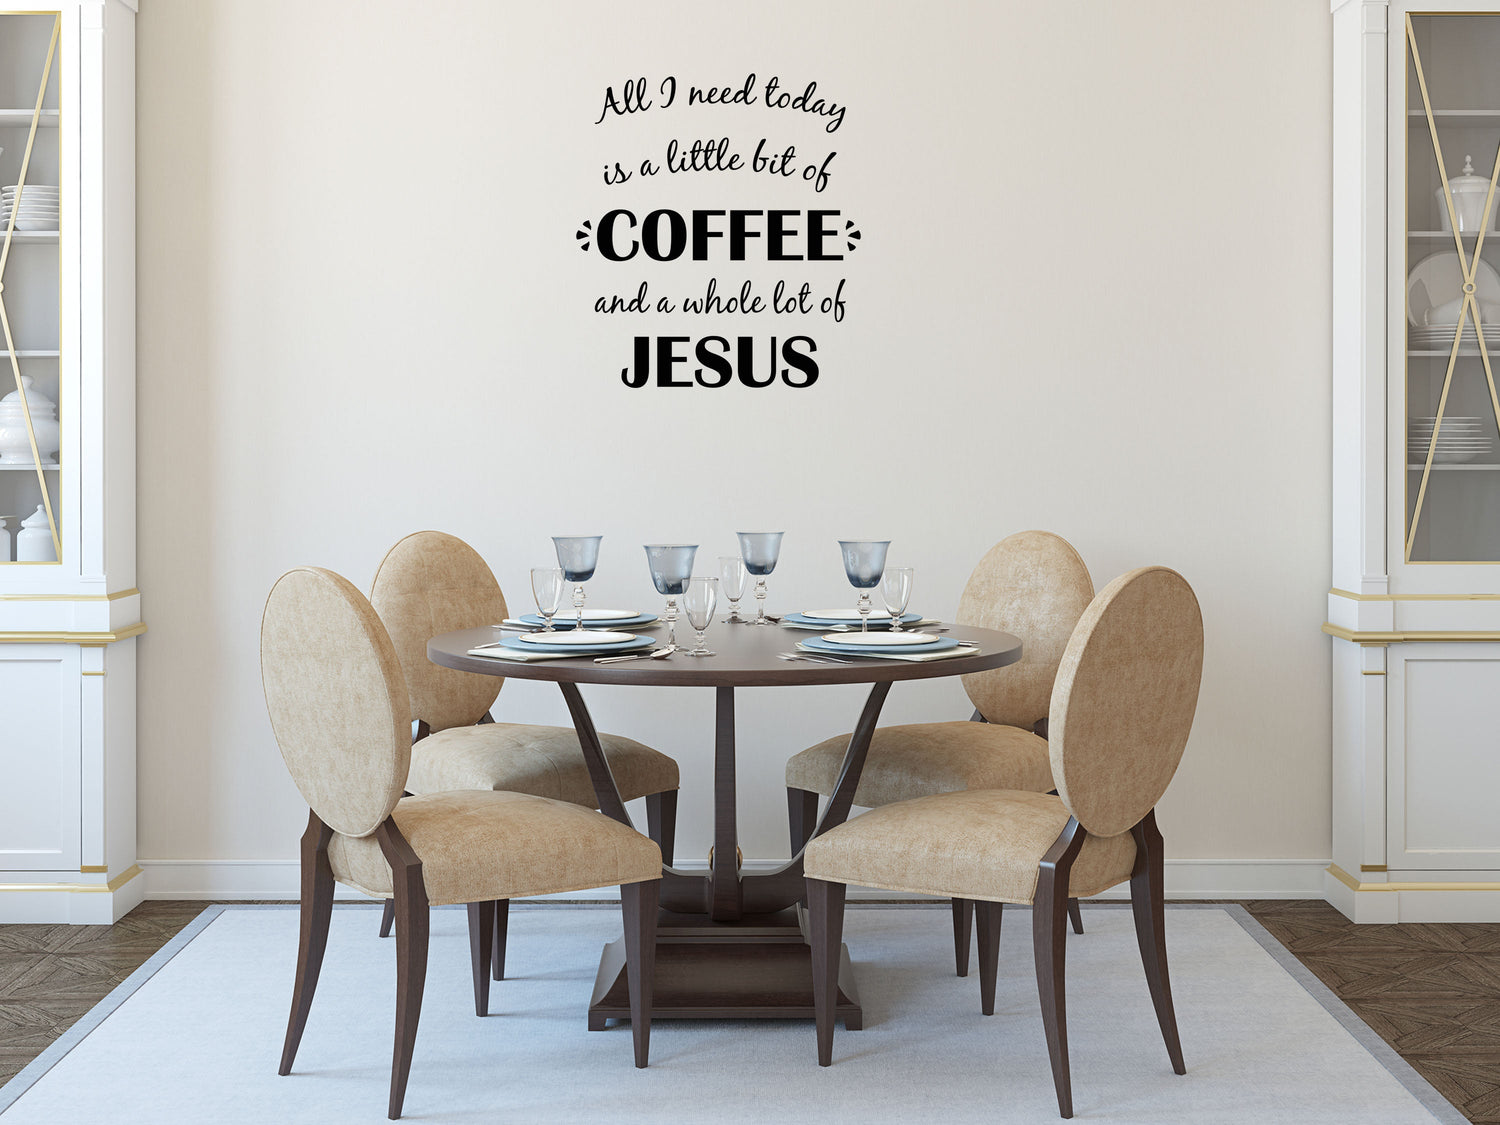 All I Need Today Is a Little Bit Of Coffee Inspirational Wall Sticker Quote Vinyl Wall Decal Inspirational Wall Signs 